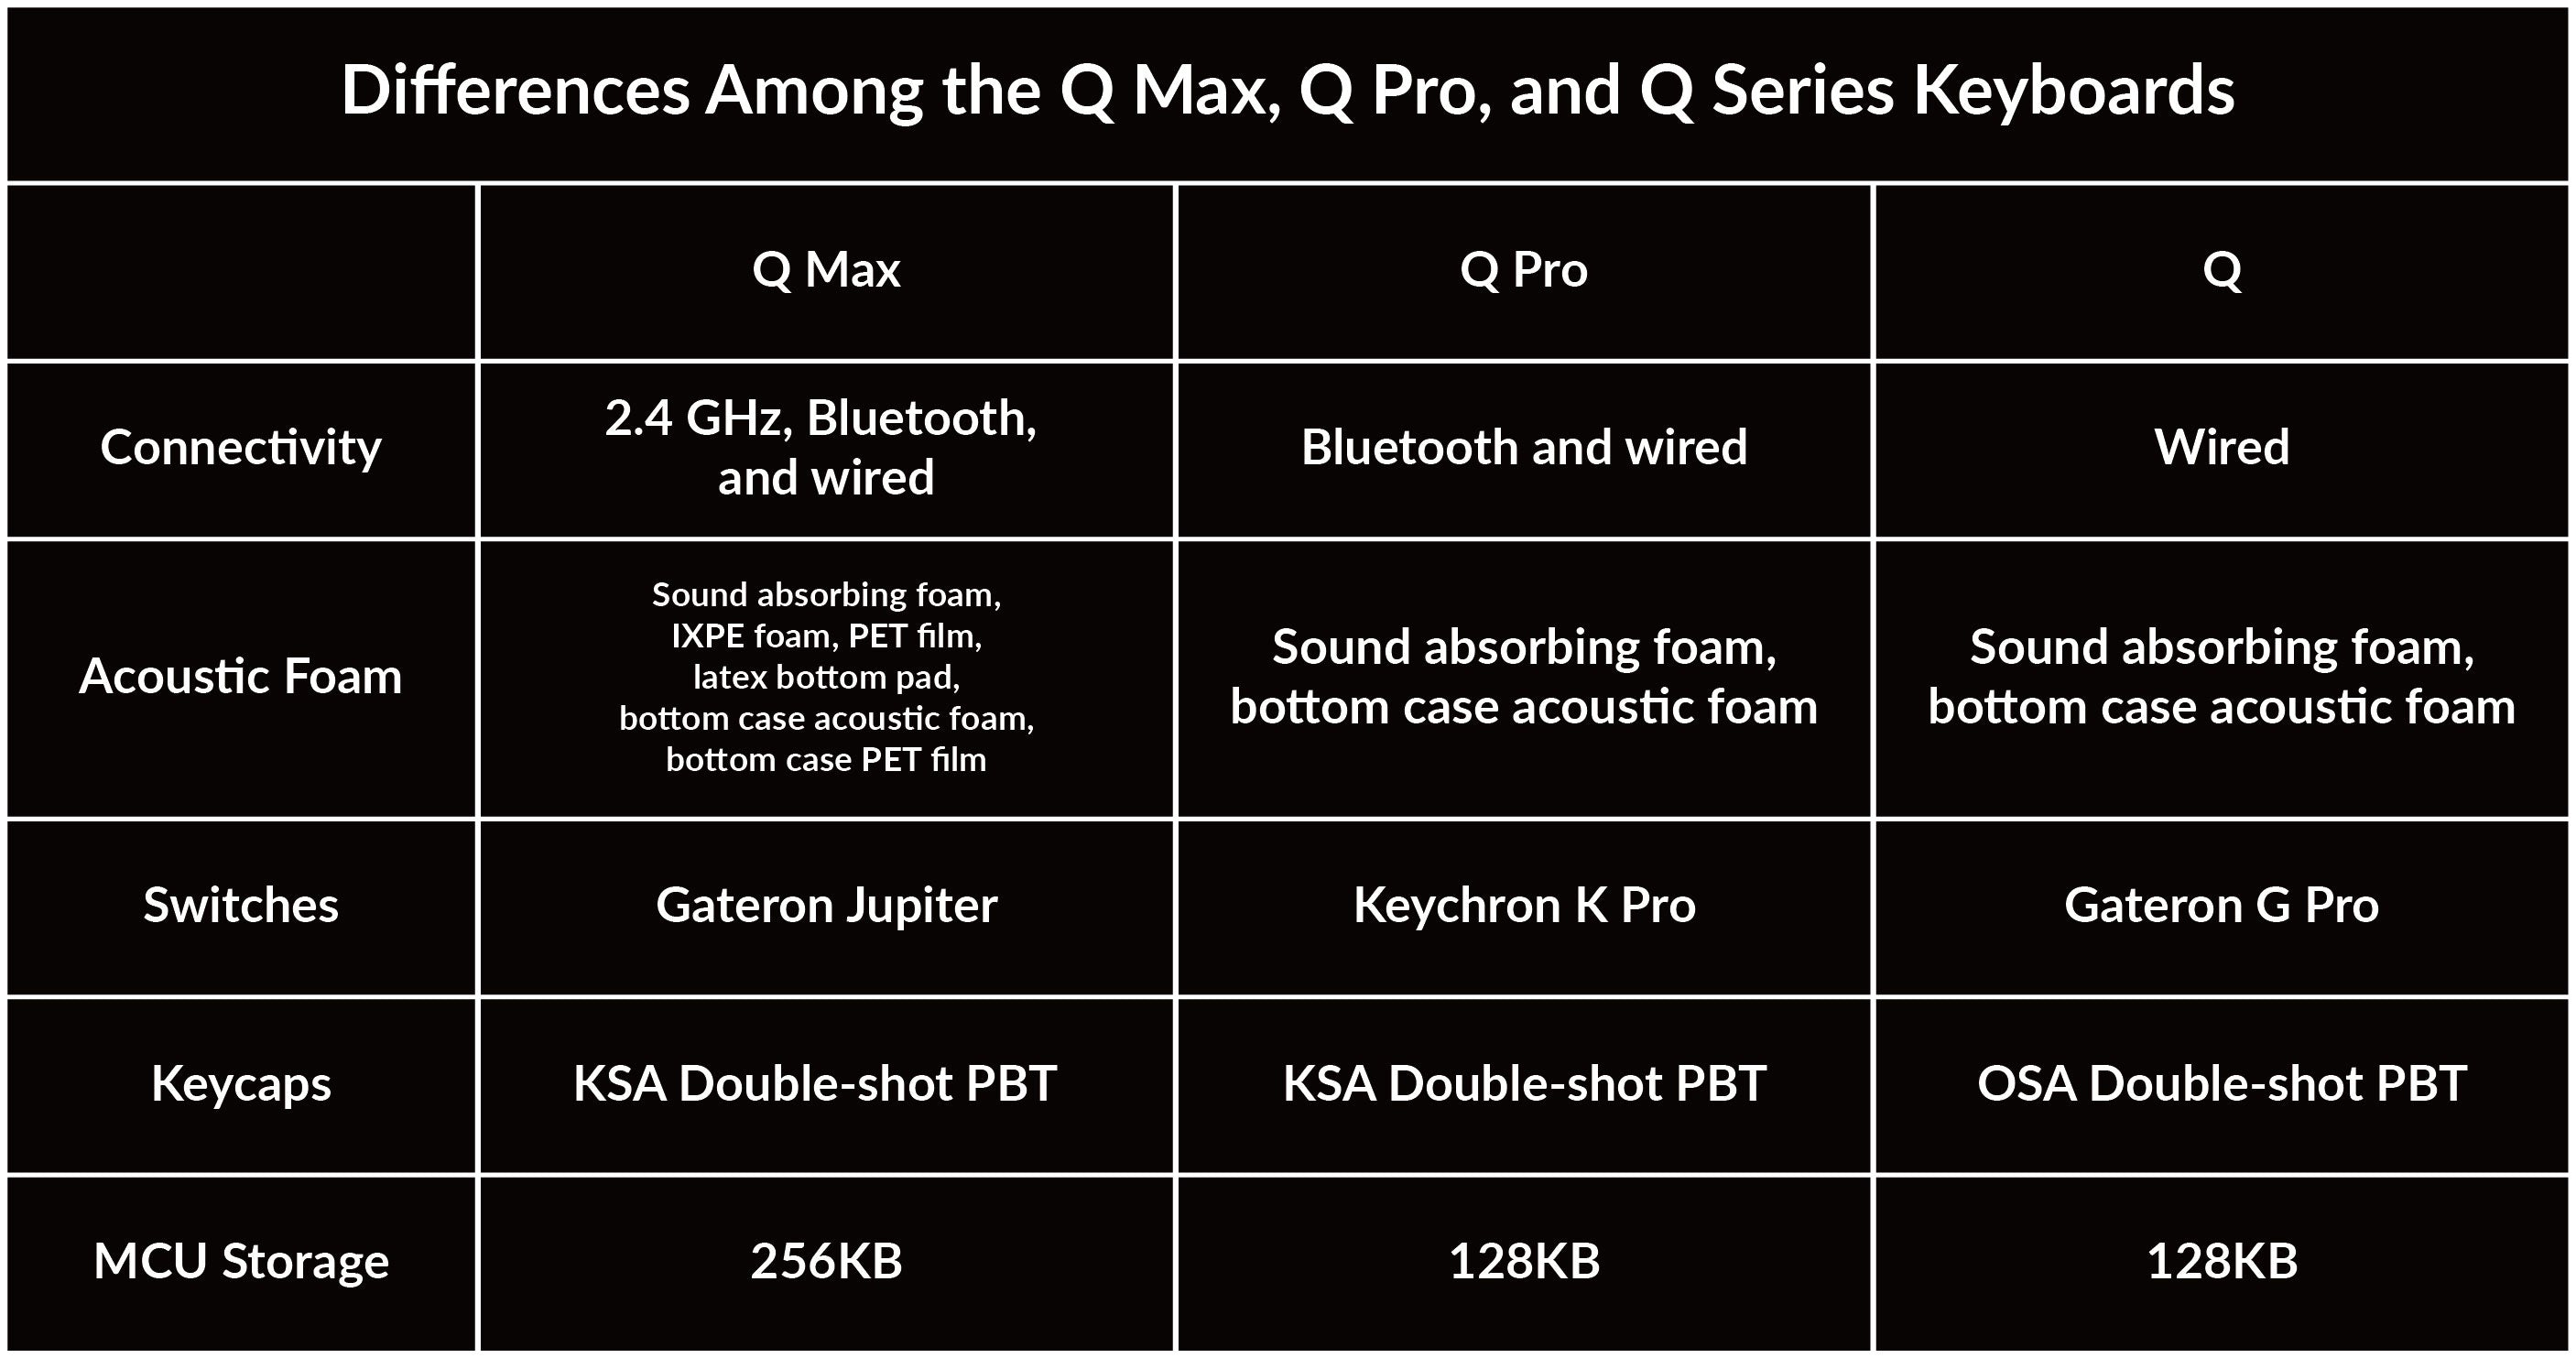 Difference-among-Q-Max,-Q-Pro,-and-Q-series-keyboards.jpg__PID:4990fa4e-ca73-4cbc-8d40-fe9125b64487